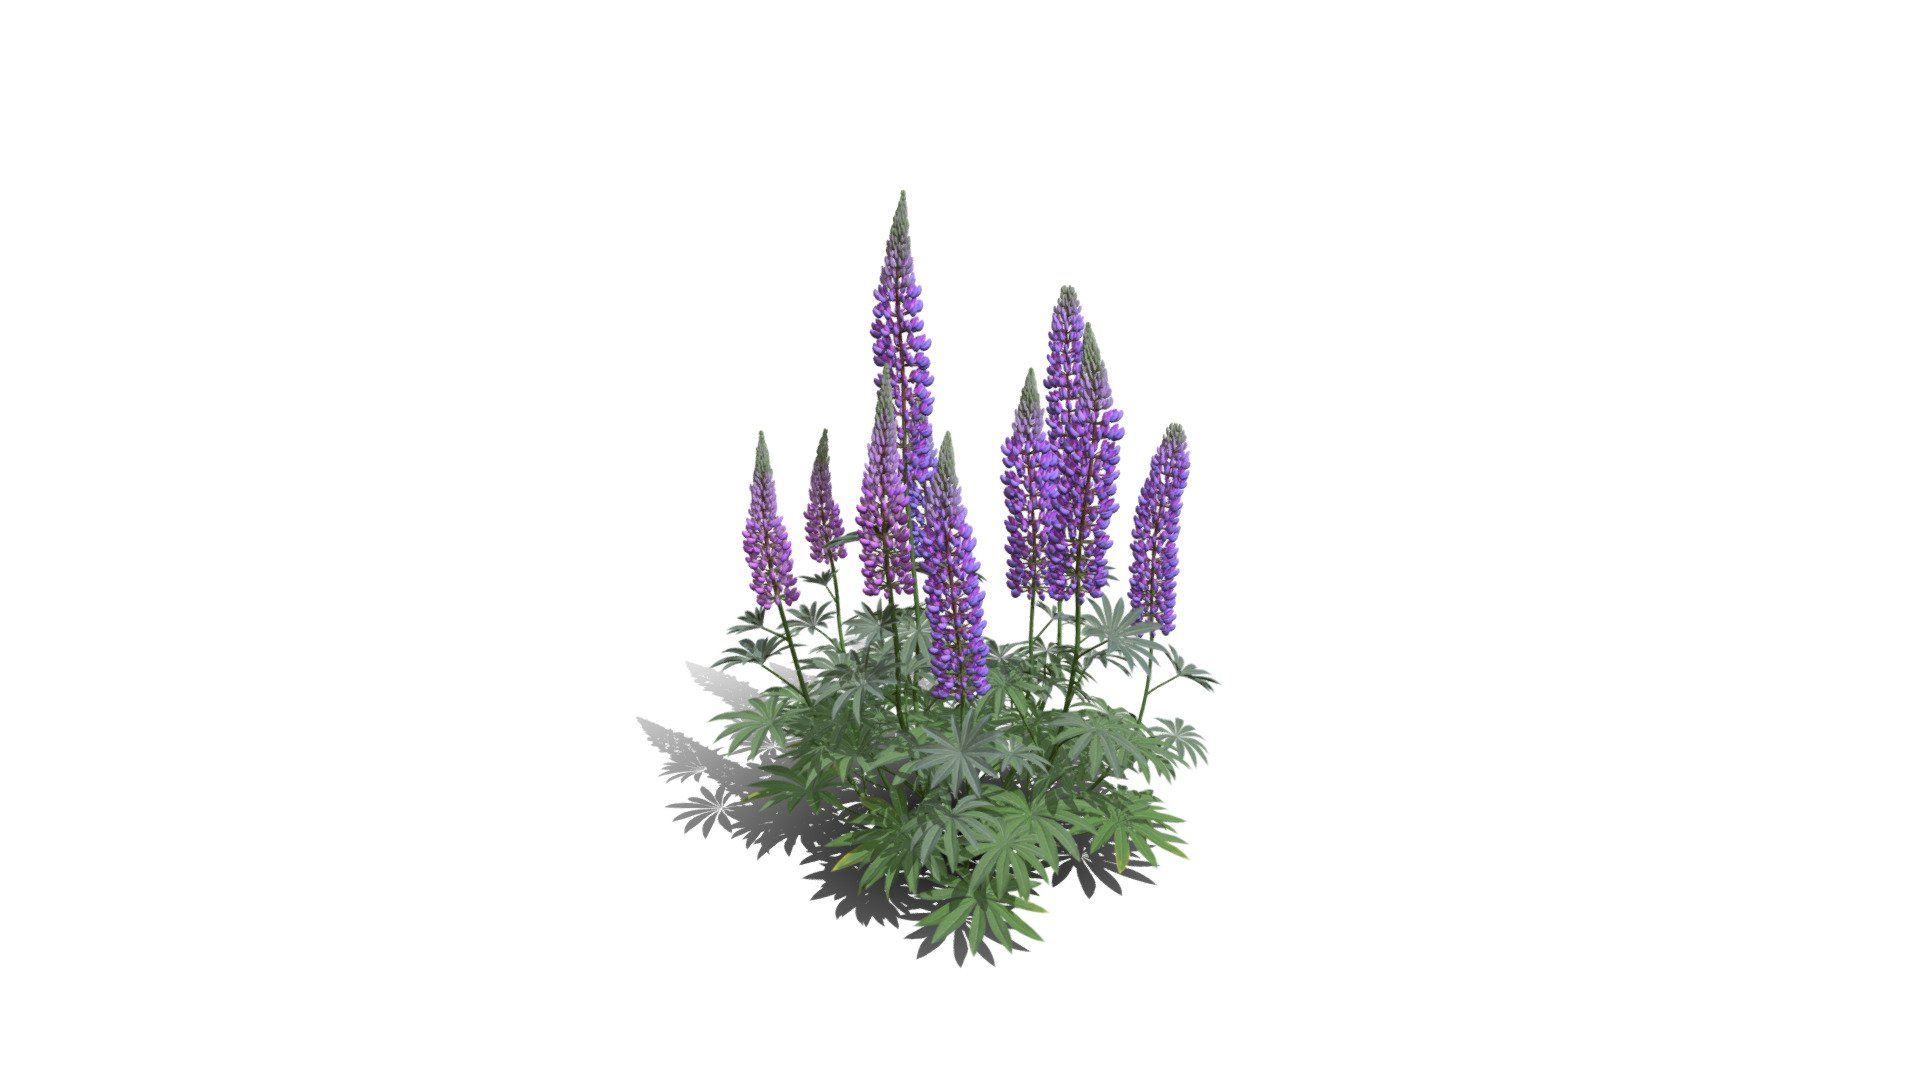 Model specs:





Species Latin name: Lupinus polyphyllus




Species Common name: Large-leaved lupine




Preset name: Long big group




Maturity stage: Adult




Health stage: Thriving




Season stage: Spring




Leaves count: 5031




Height: 1.3 meters




LODs included: Yes




Mesh type: static




Vertex colors: (R) Material blending, (A) Ambient occlusion



Better used for Hi Poly workflows!

Species description:





Region: North America




Biomes: Grassland




Climatic Zones: Cold temperate,Warm temperate




Plant type: Perennial



This PlantCatalog mesh was exported at 40% of its maximum mesh resolution. With the full PlantCatalog, customize hundreds of procedural models + apply wind animations + convert to native shaders and a lot more: https://info.e-onsoftware.com/plantcatalog/ - Realistic HD Large-leaved lupine (9/18) - Buy Royalty Free 3D model by PlantCatalog 3d model